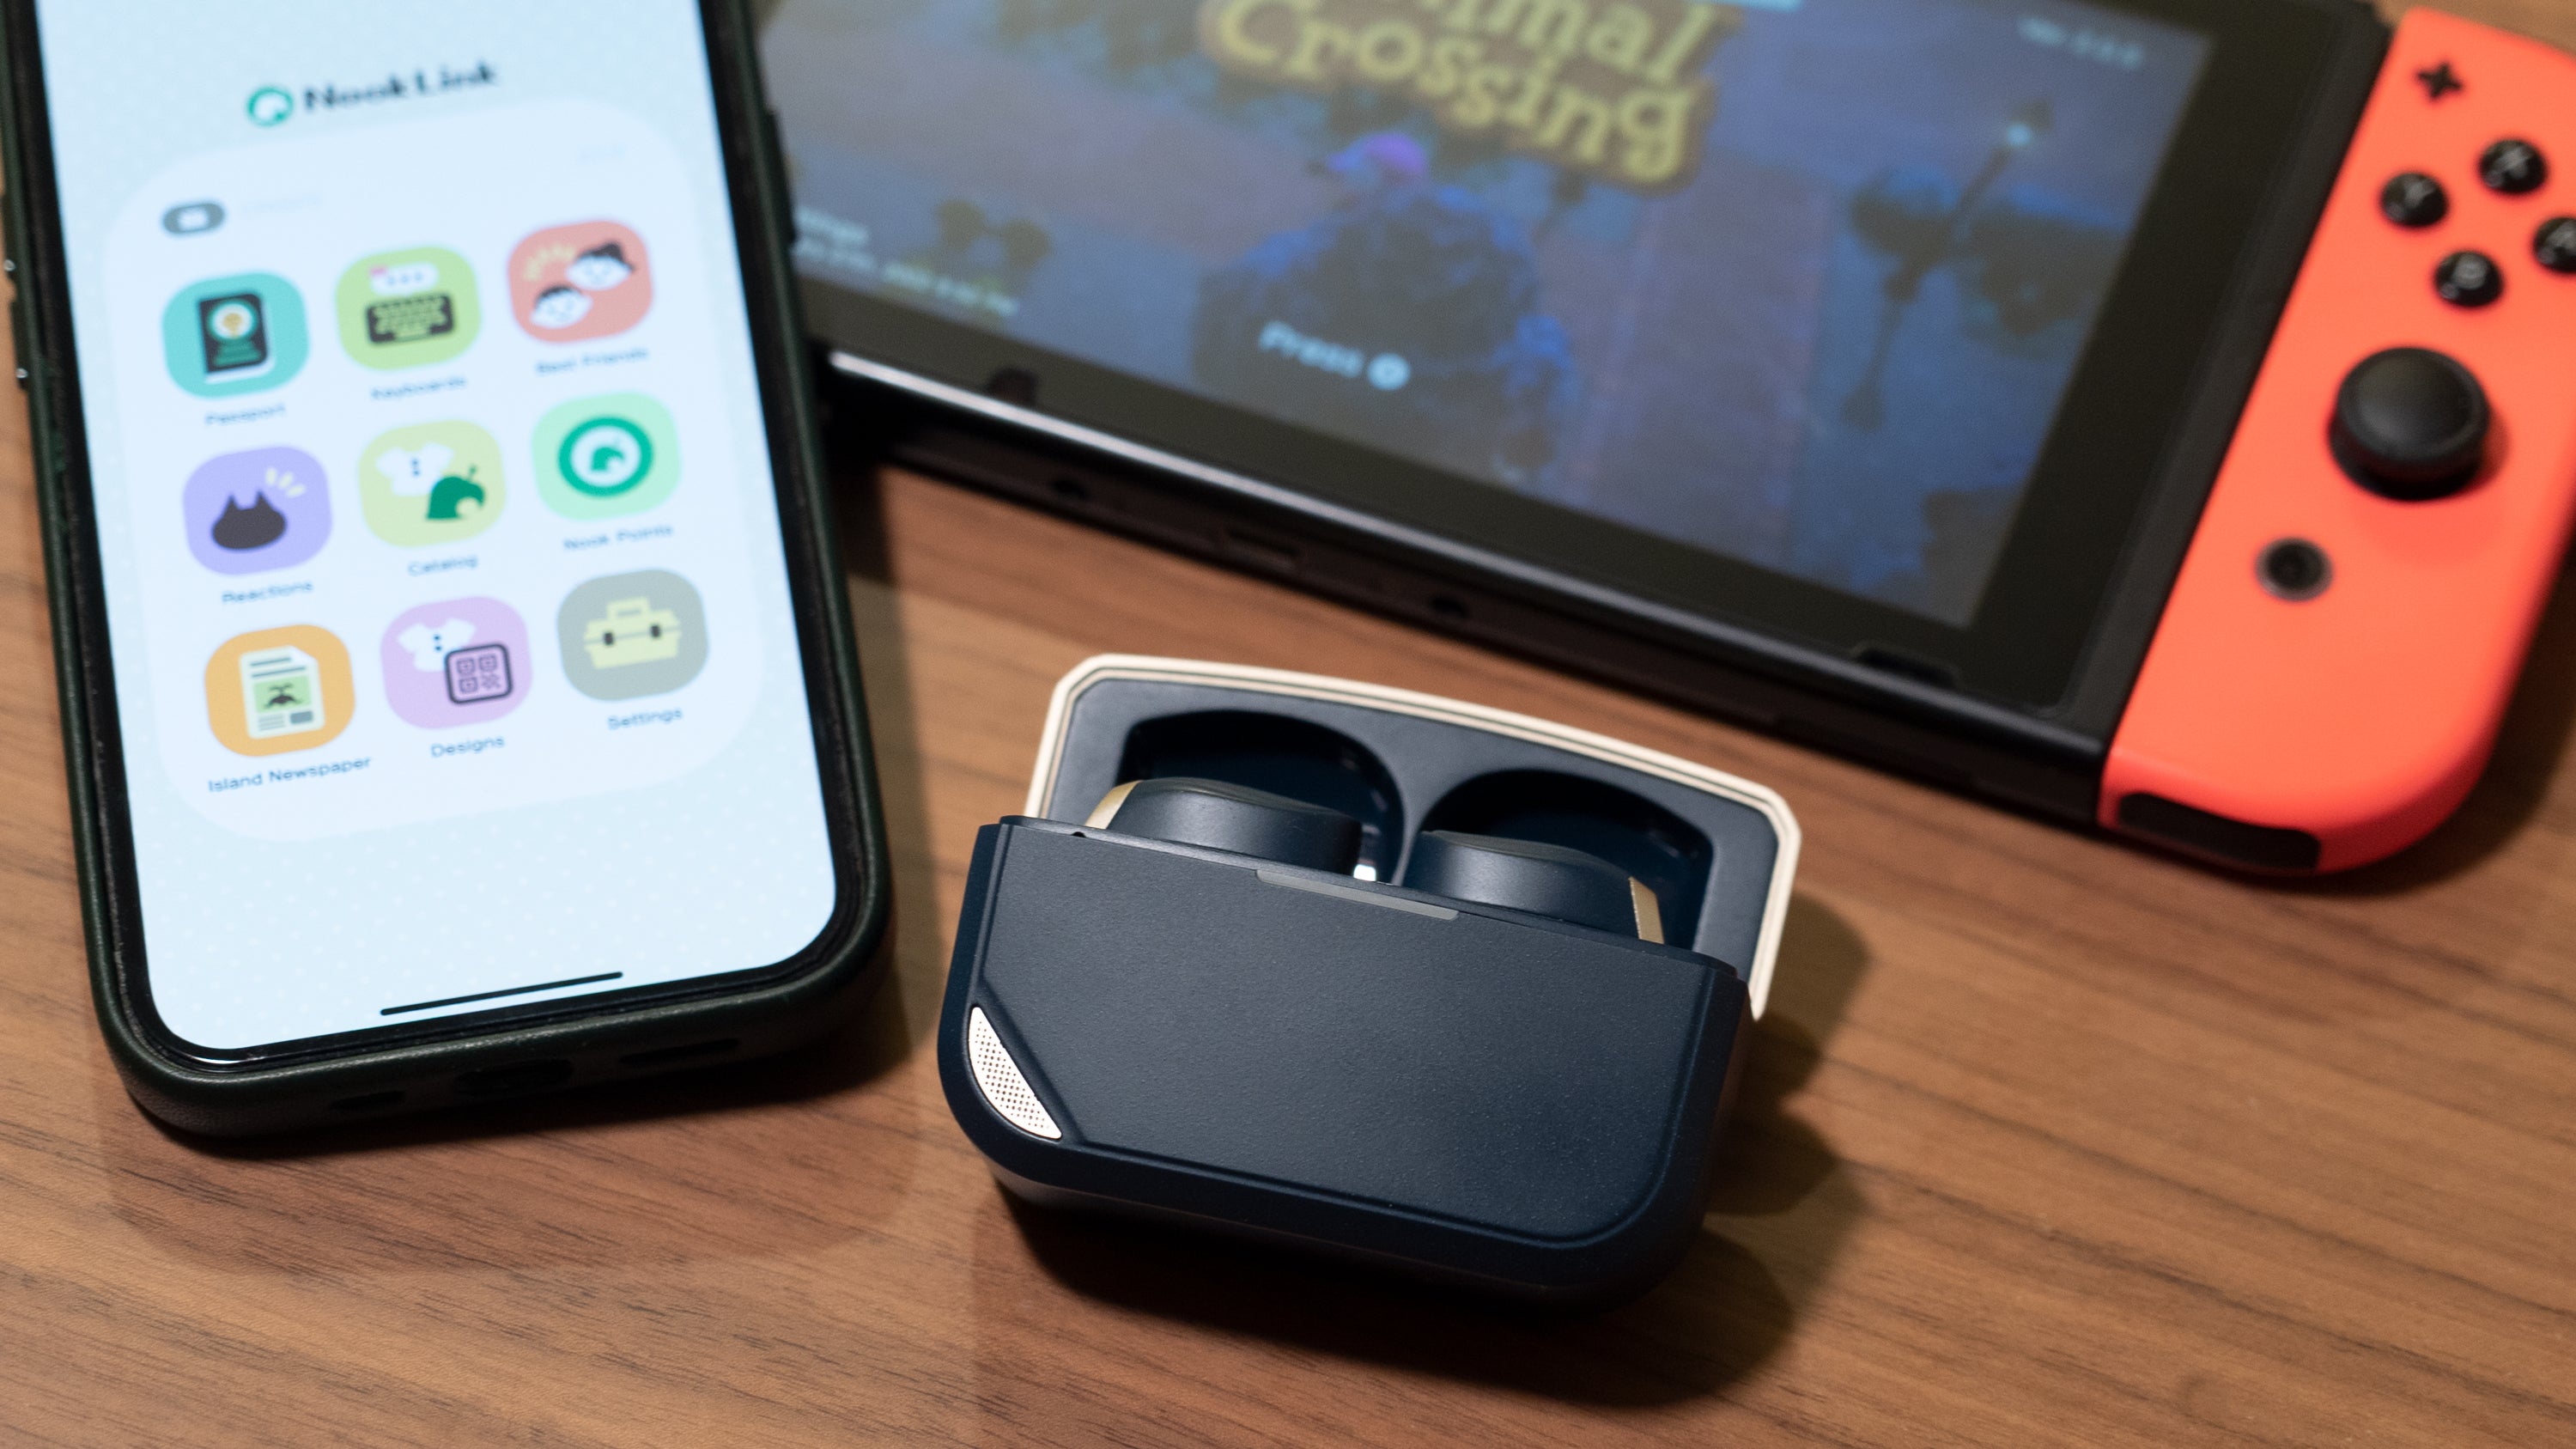 These Wireless Earbuds Let You Listen to Two Devices at the Same Time